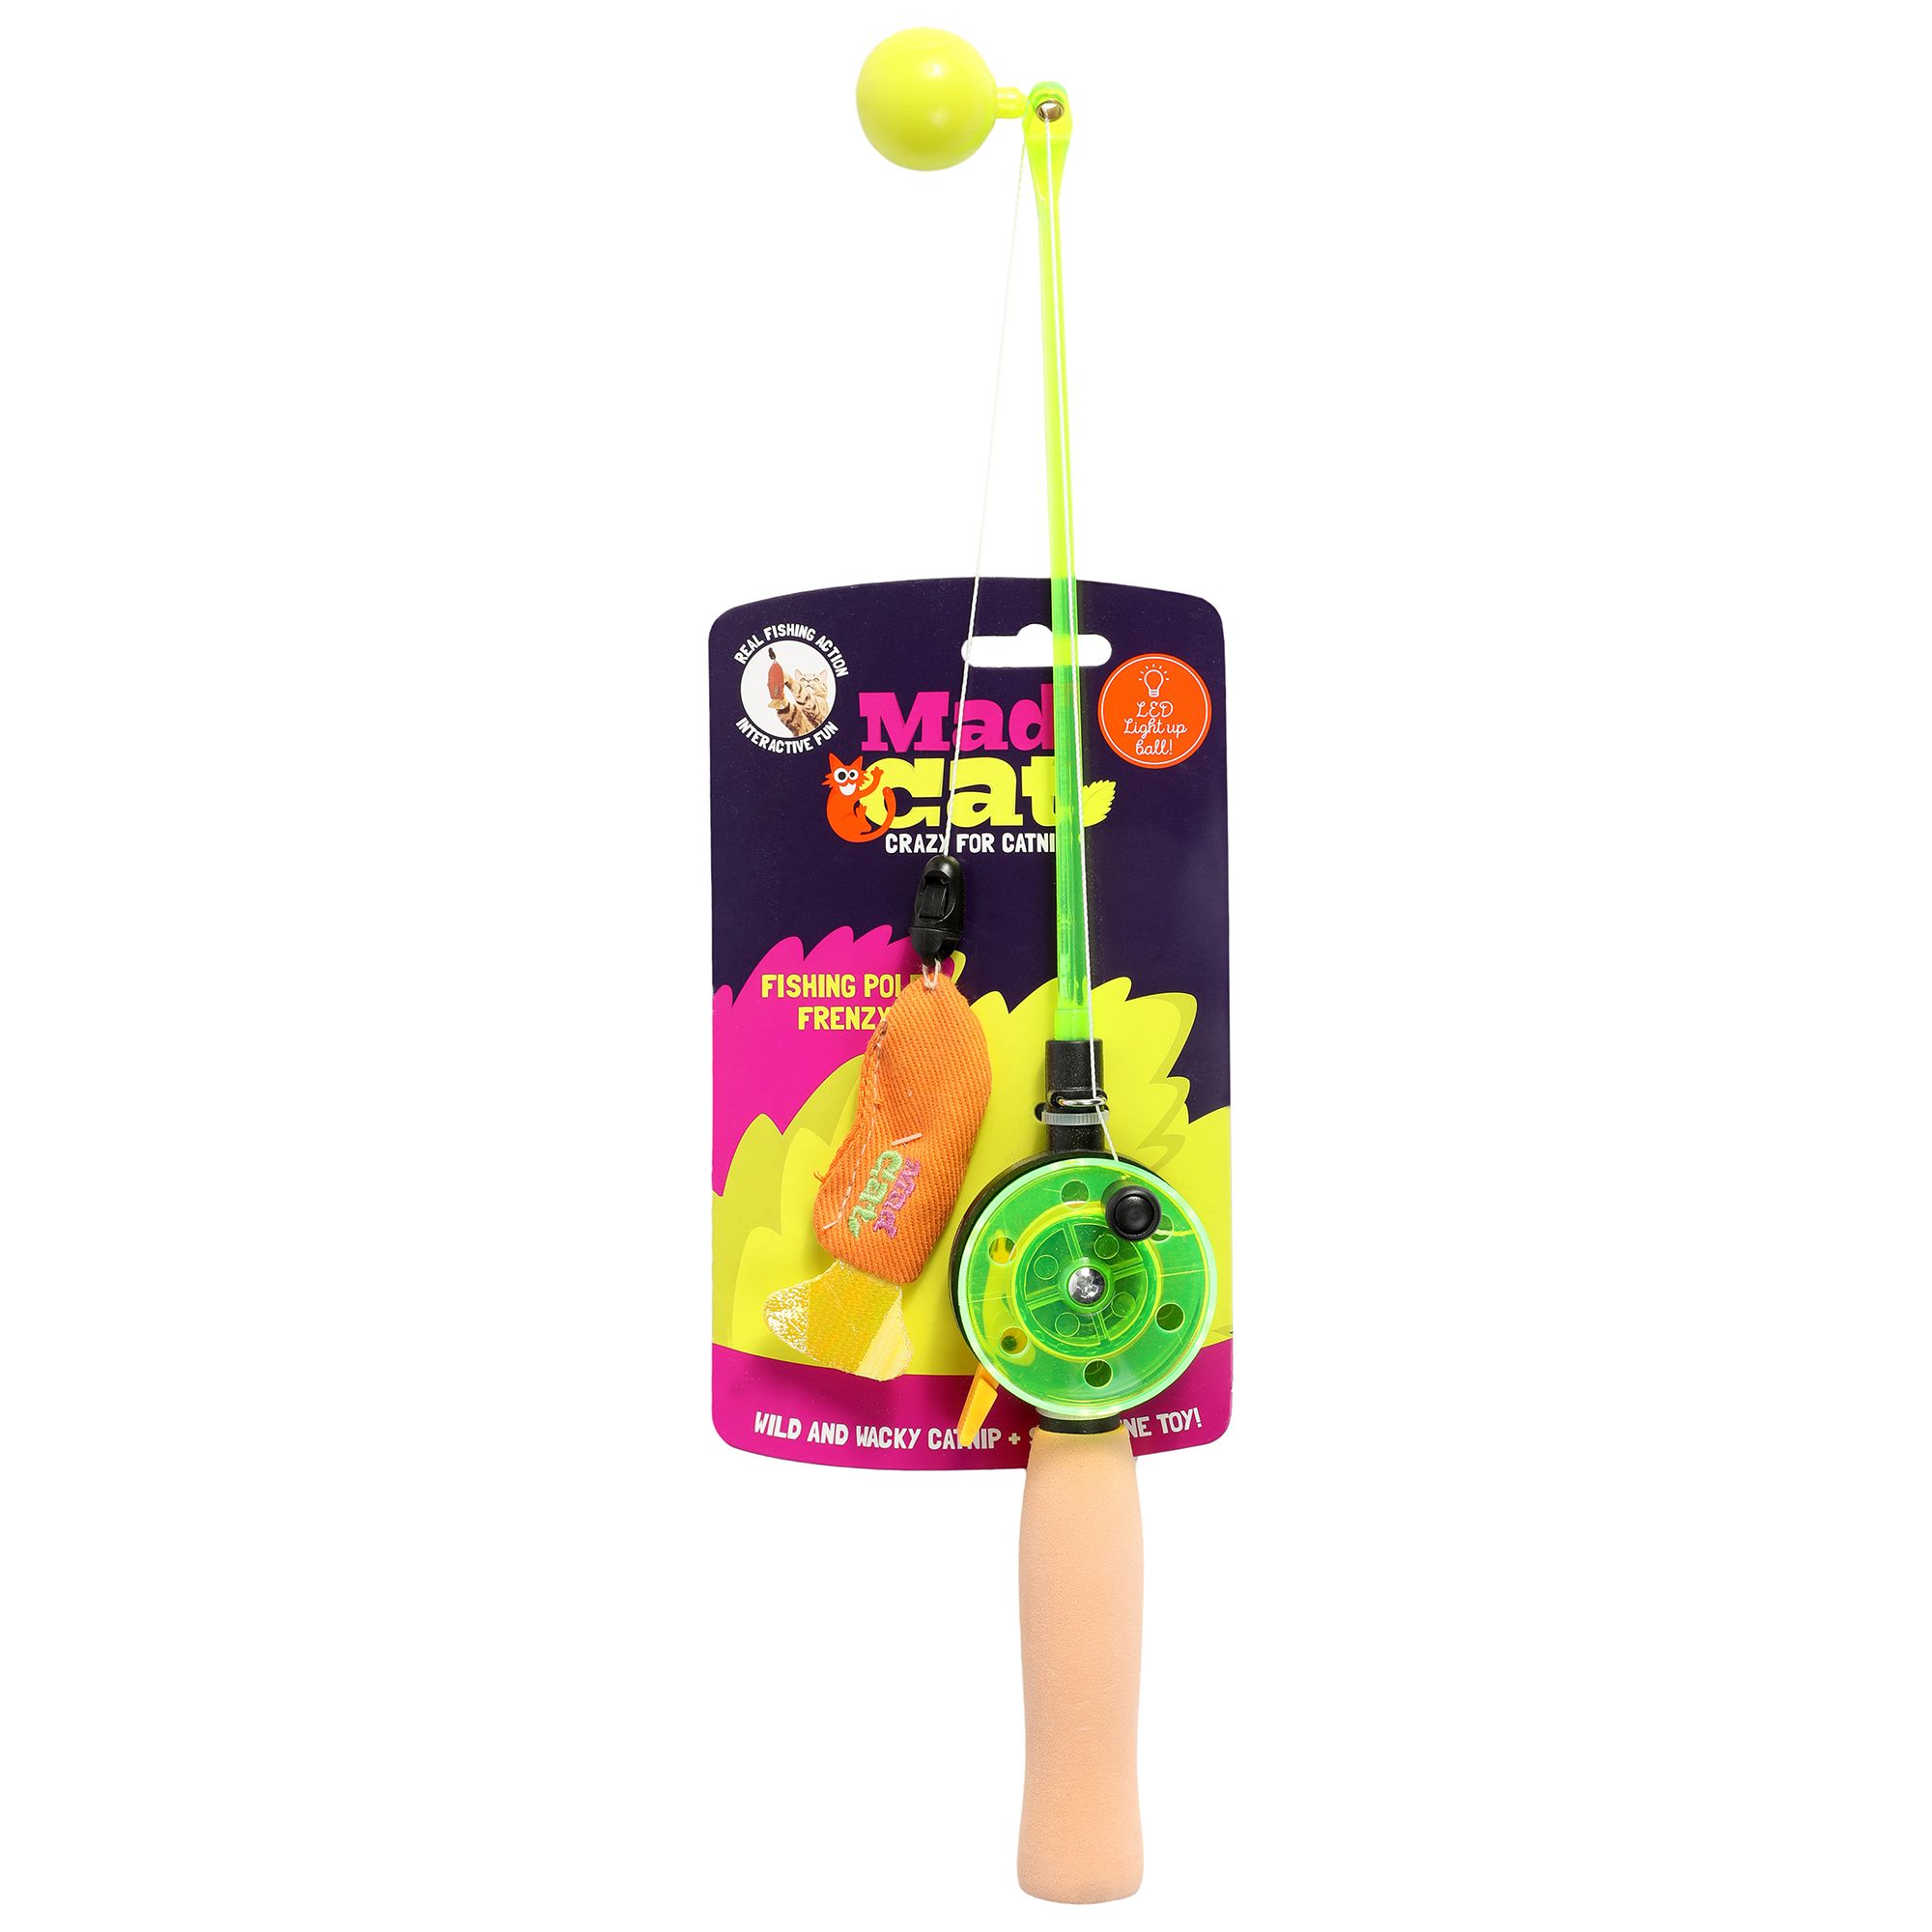 Fairly Odd Novelties Cat Fishing Pole Toy - Funny Interactive Fish Toy for Cats, Kittens, and Small Pets. Giftable Cat Fishing Rod Novelty Gifts, ITE